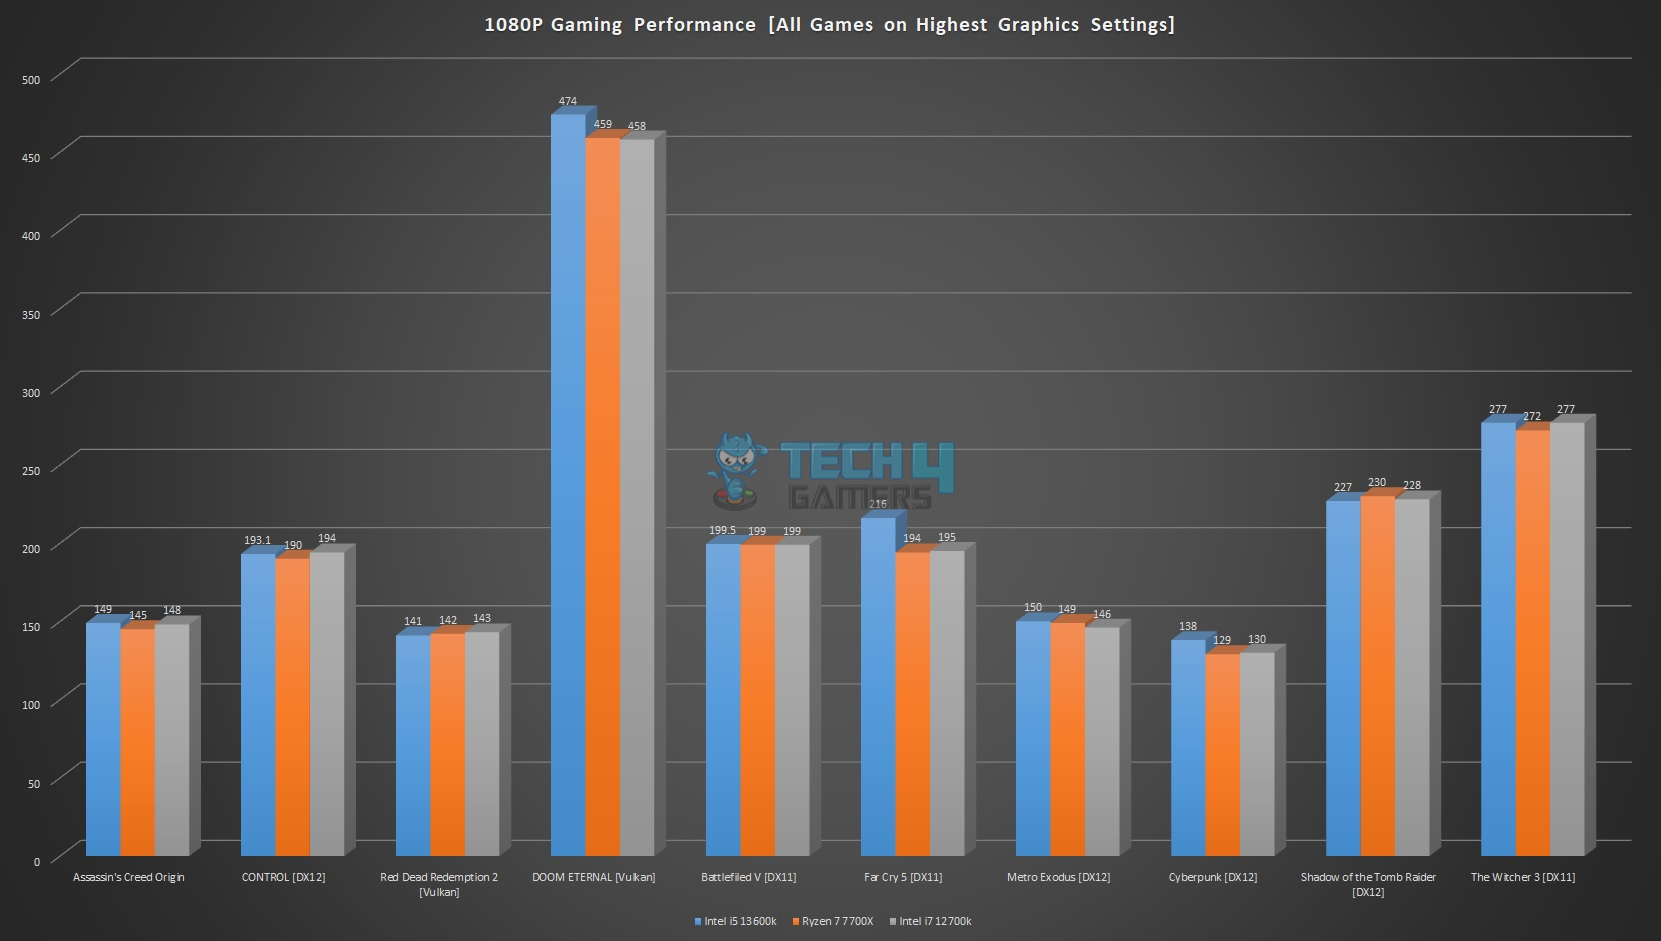 1080p Gaming Performance of Core i5-13600K